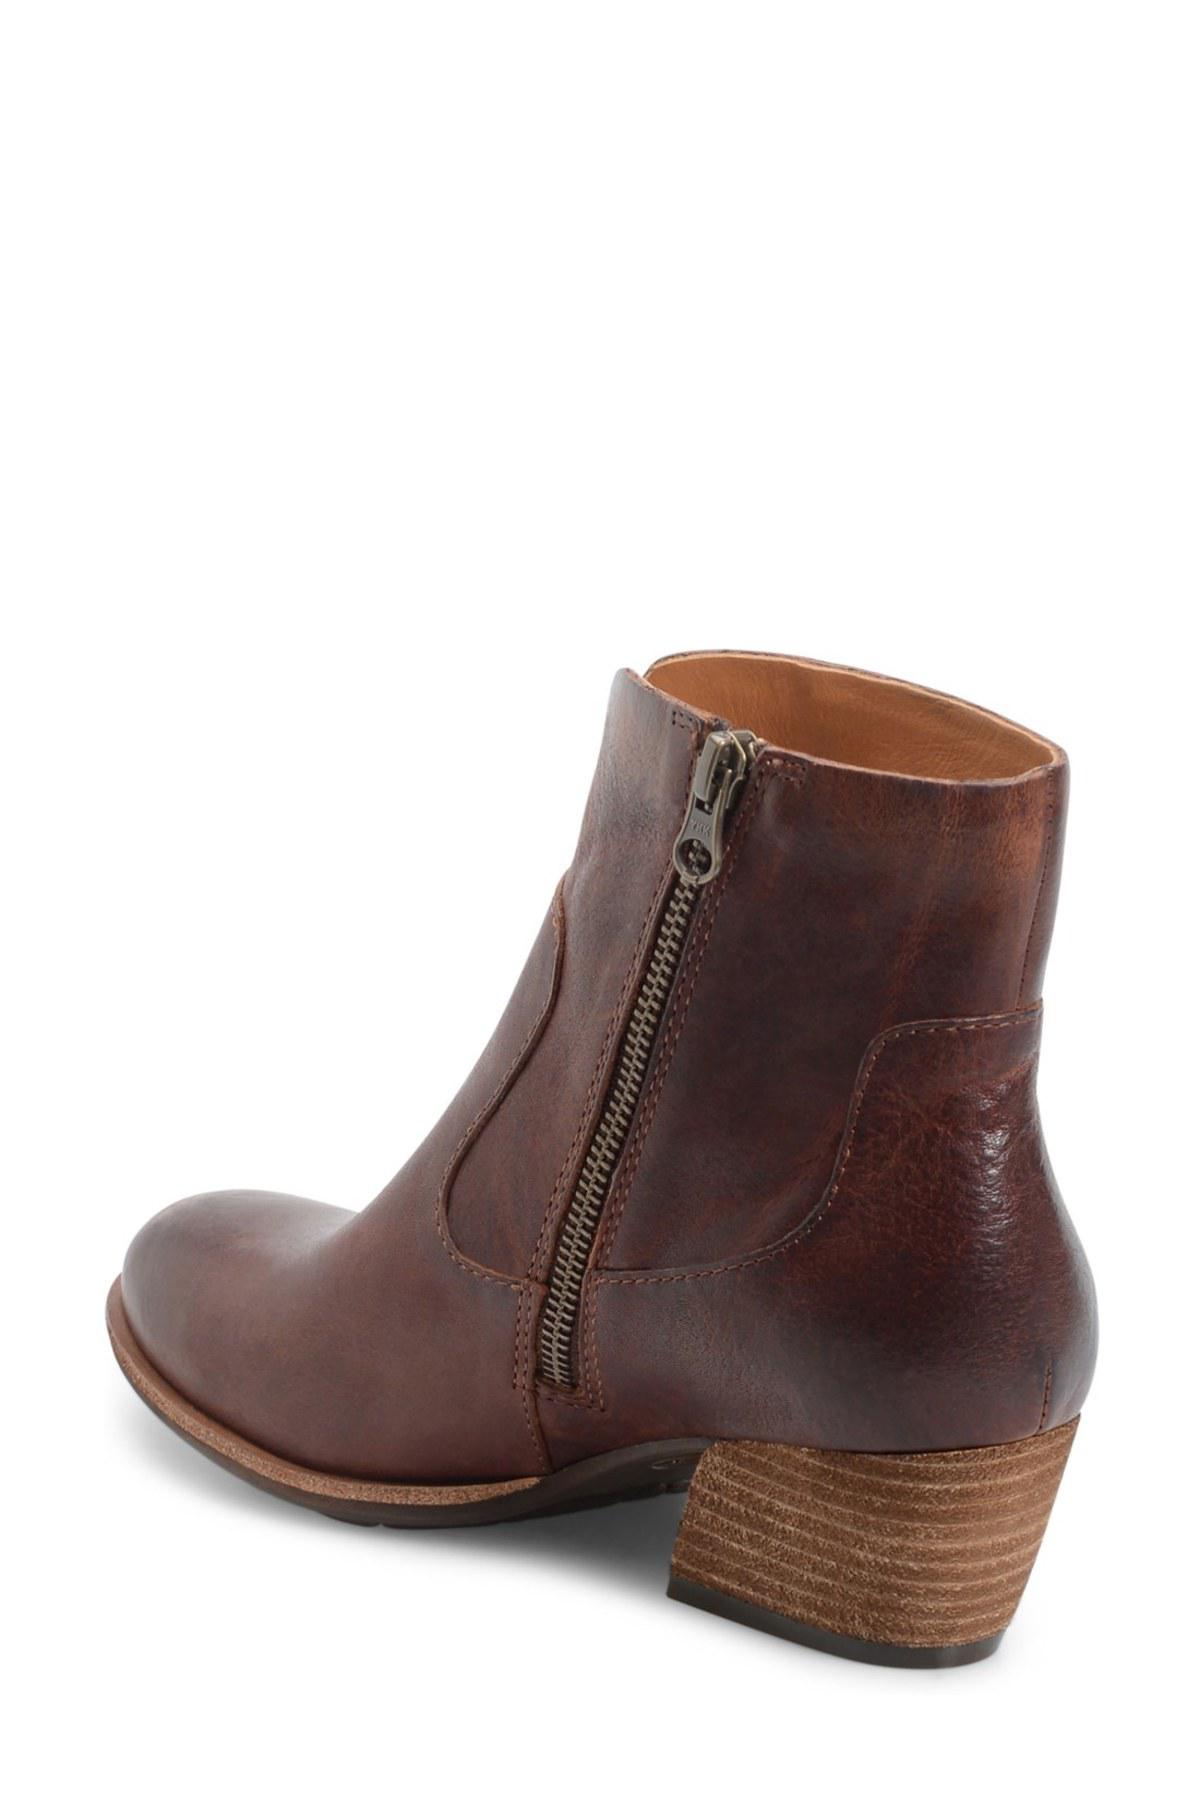 Kork-Ease Sherrill Leather Ankle Boots in Cognac Leather (Brown) - Lyst